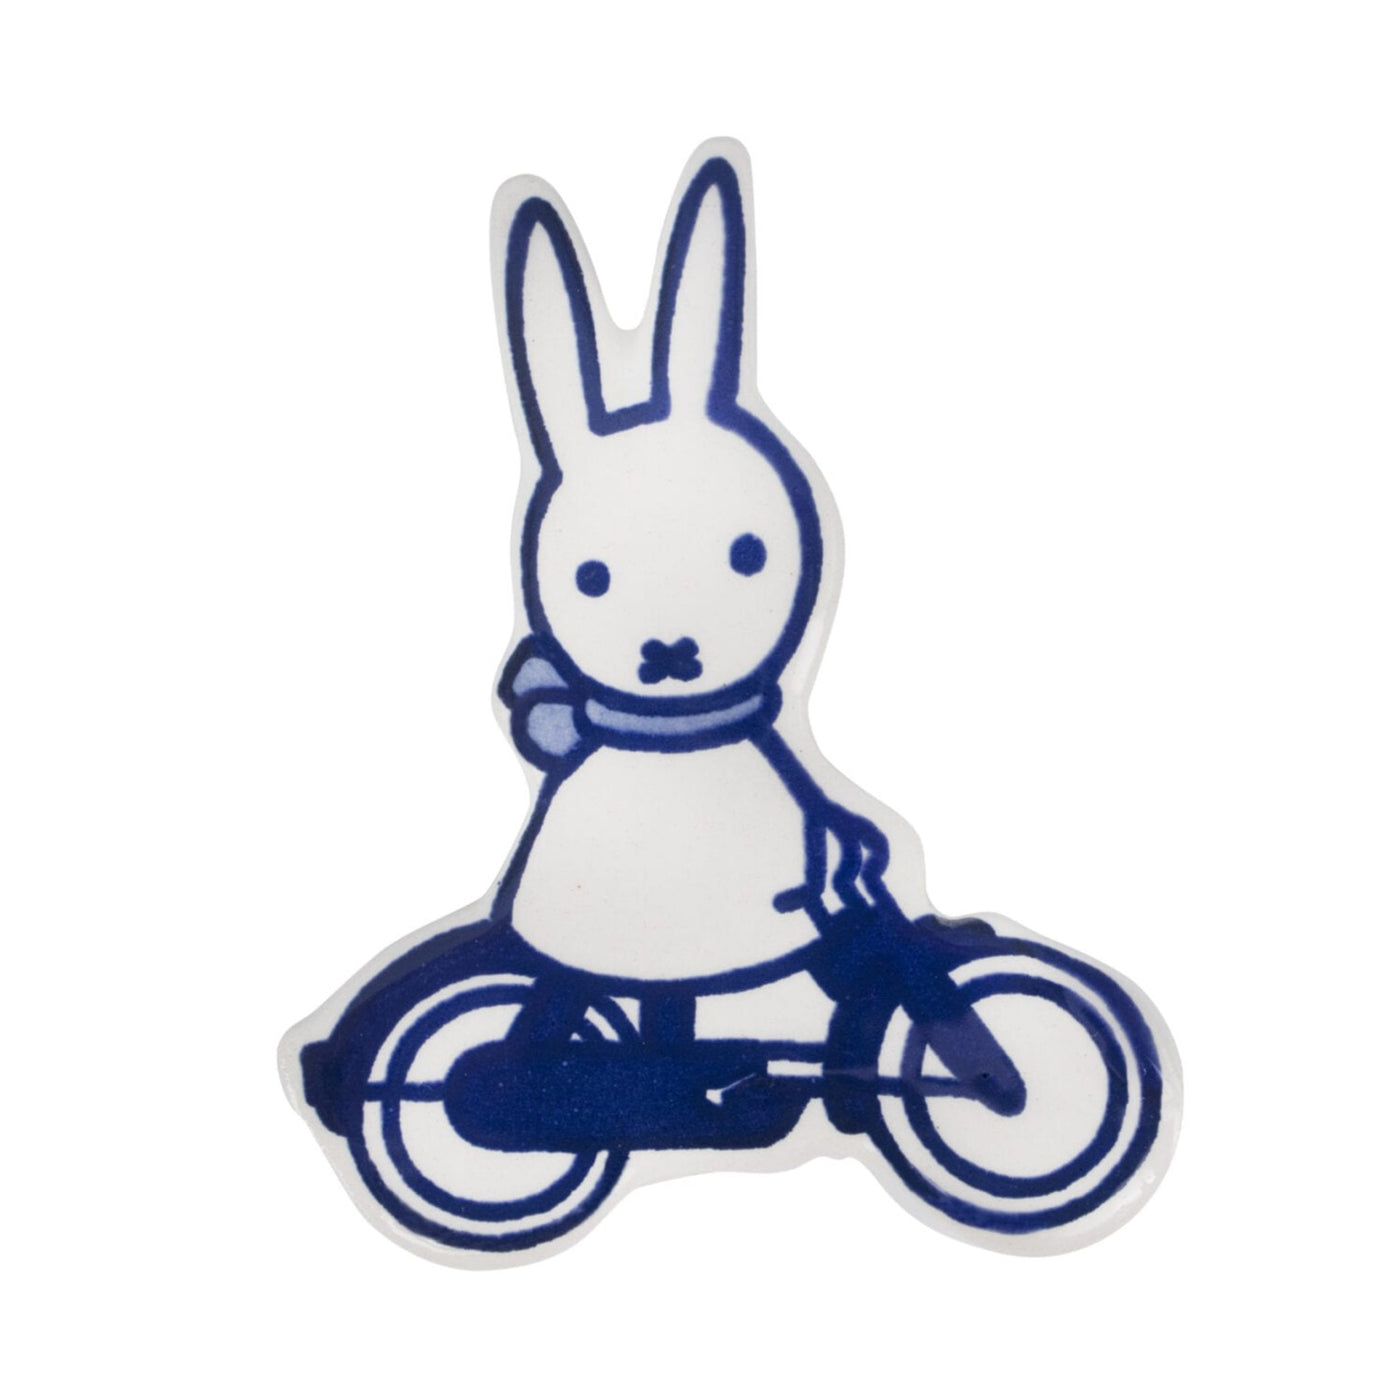 Magnet Miffy on Bike Delft Blue by Royal Delft